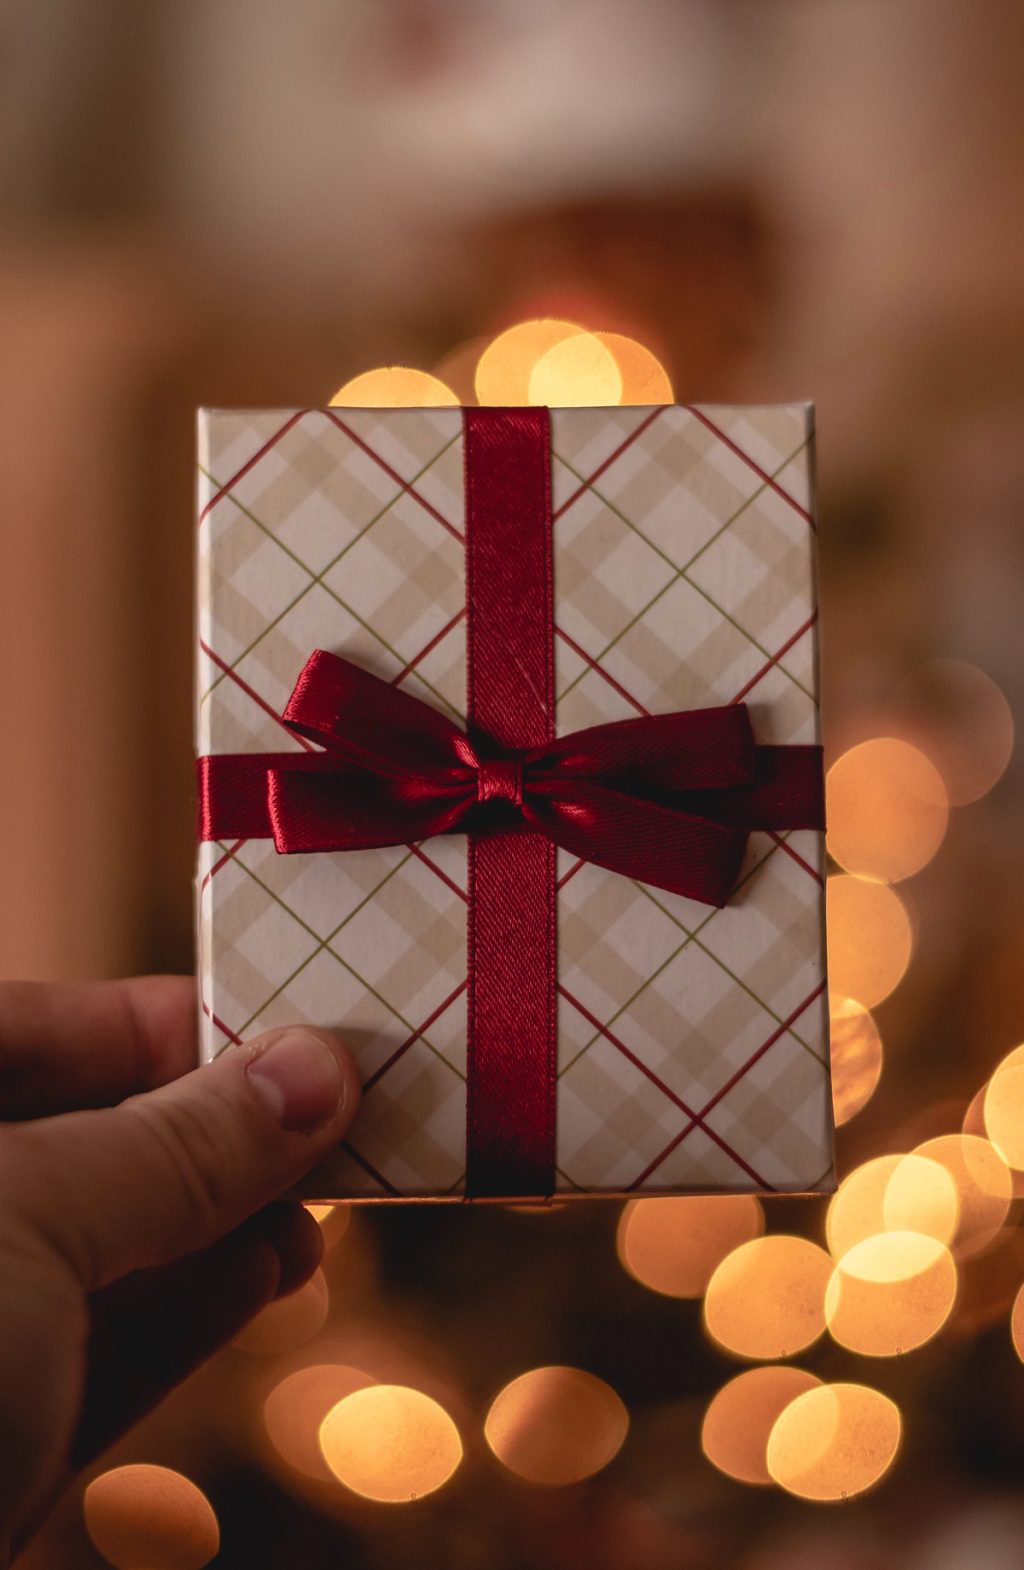 The Best Christmas Gift Ideas for Homeowners